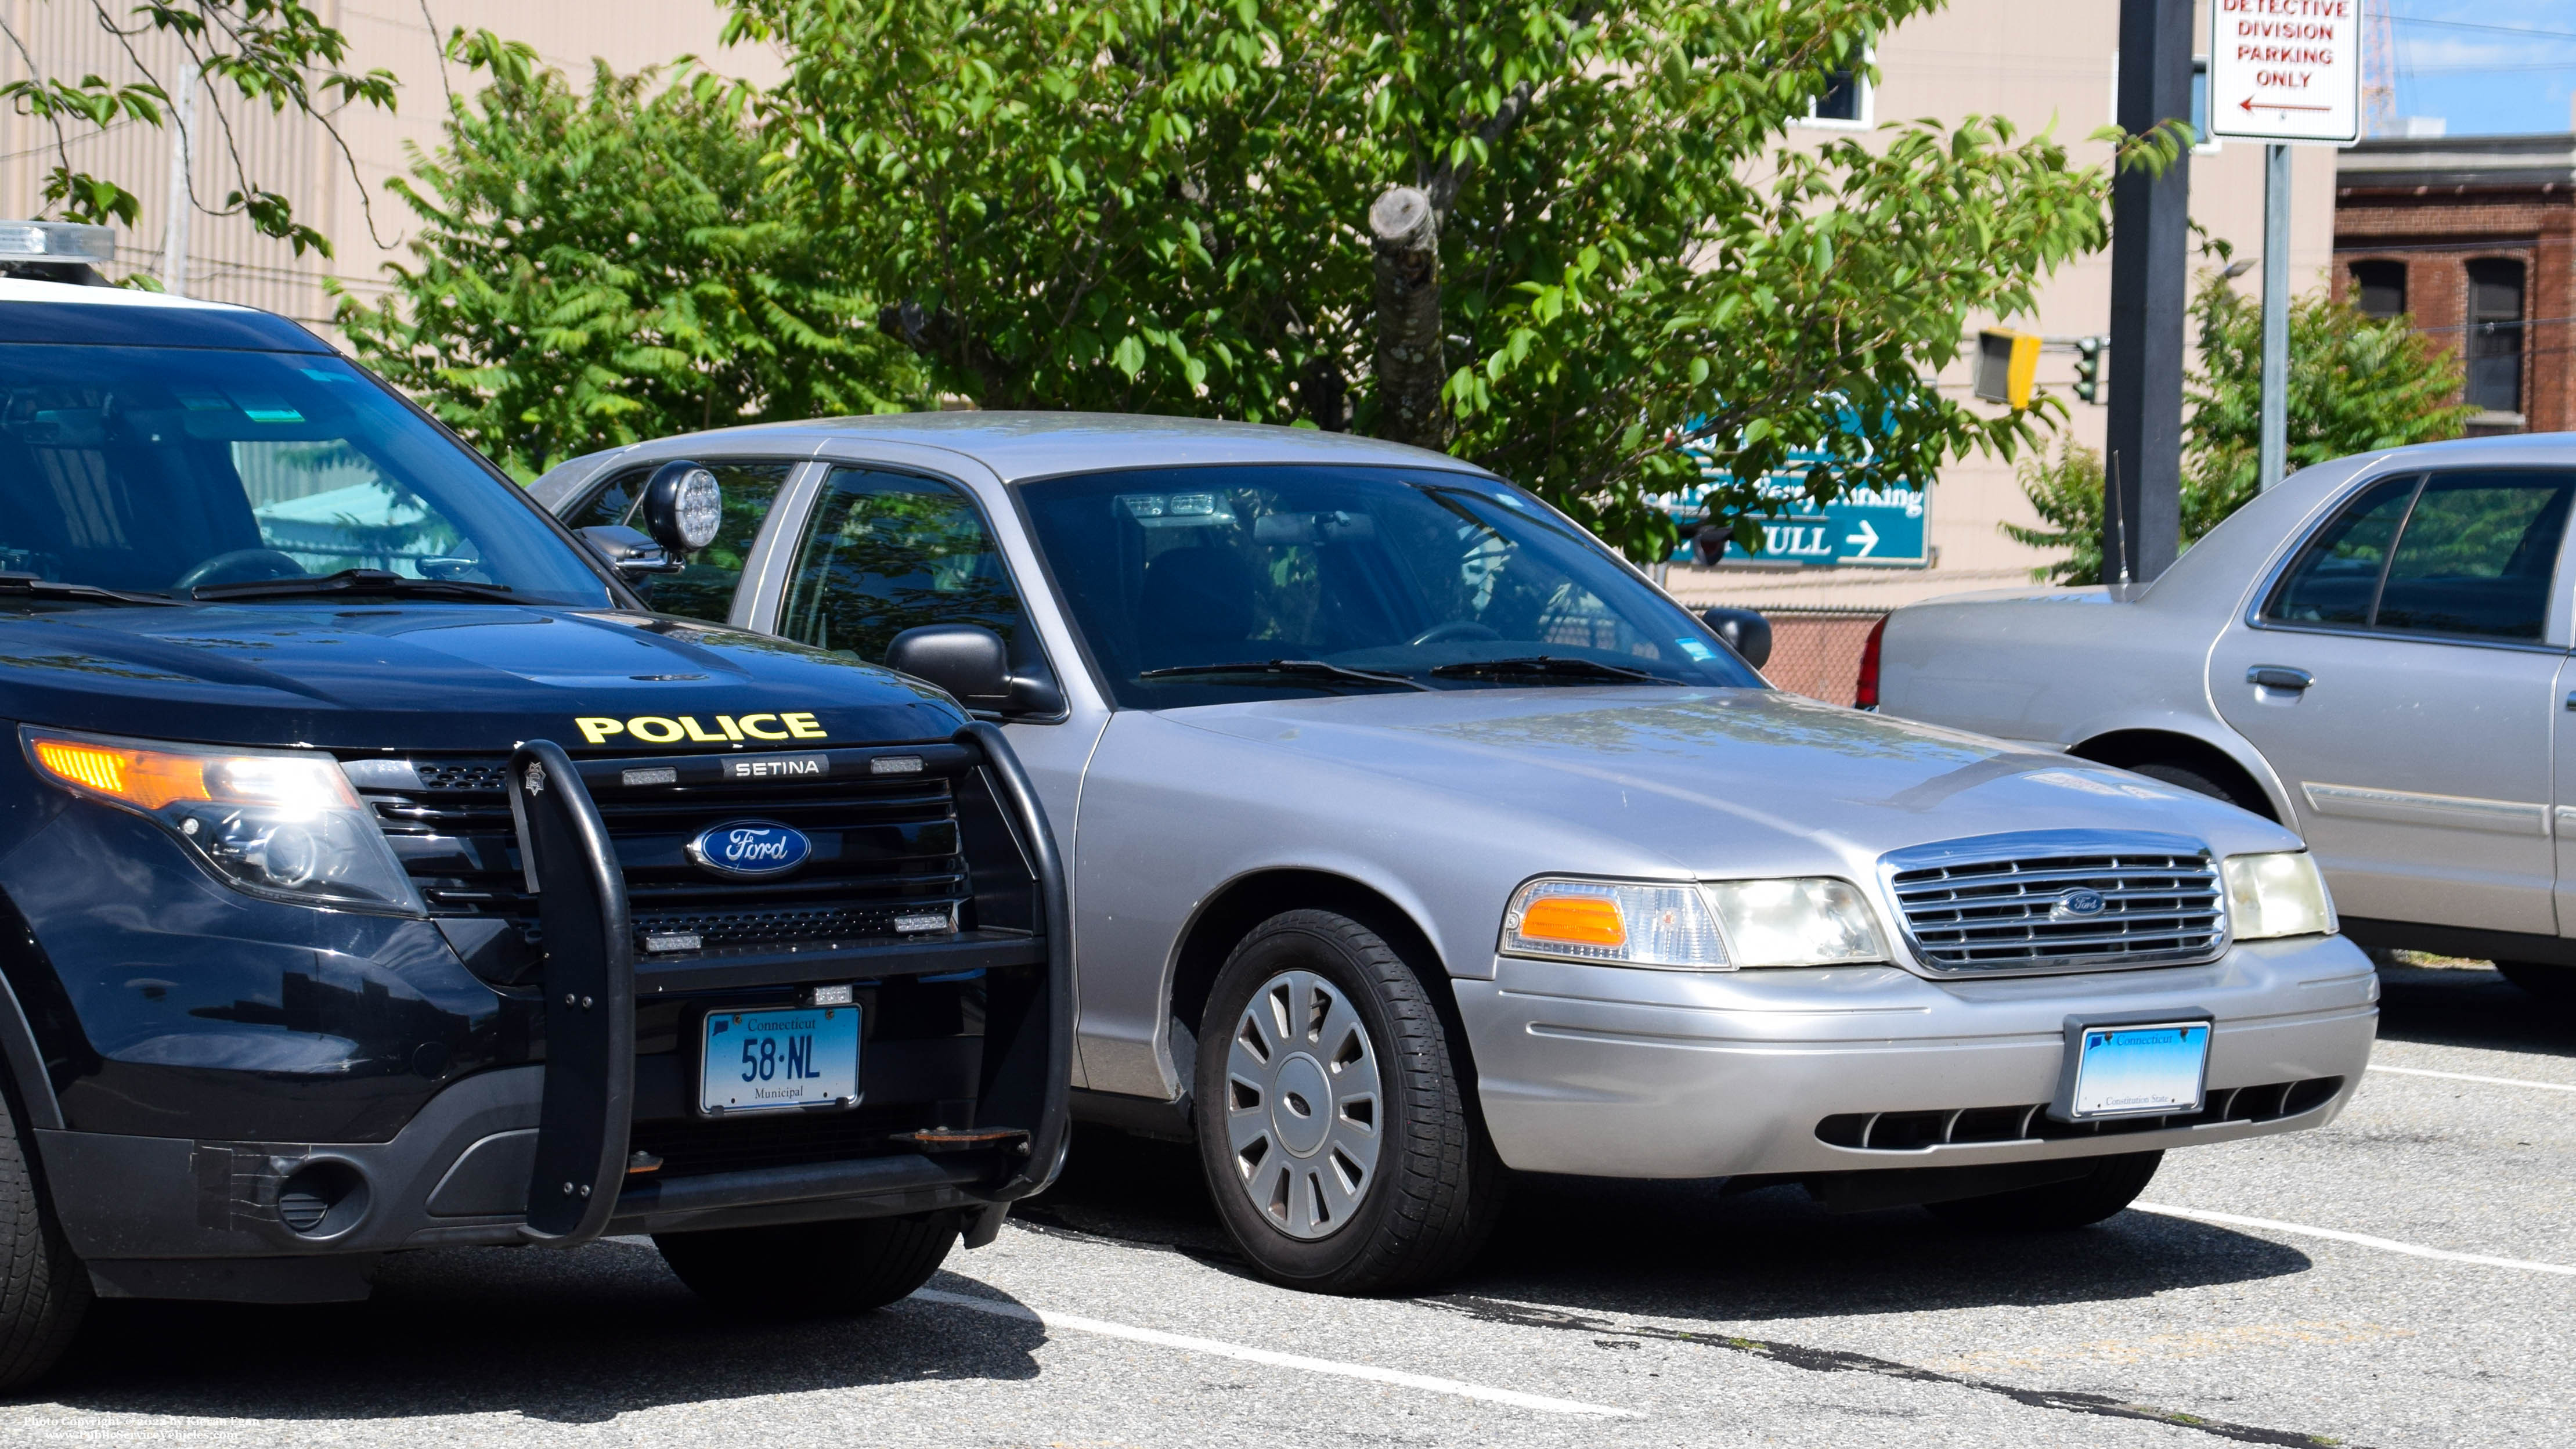 A photo  of New London Police
            Unmarked Unit, a 2010 Ford Crown Victoria Police Interceptor             taken by Kieran Egan